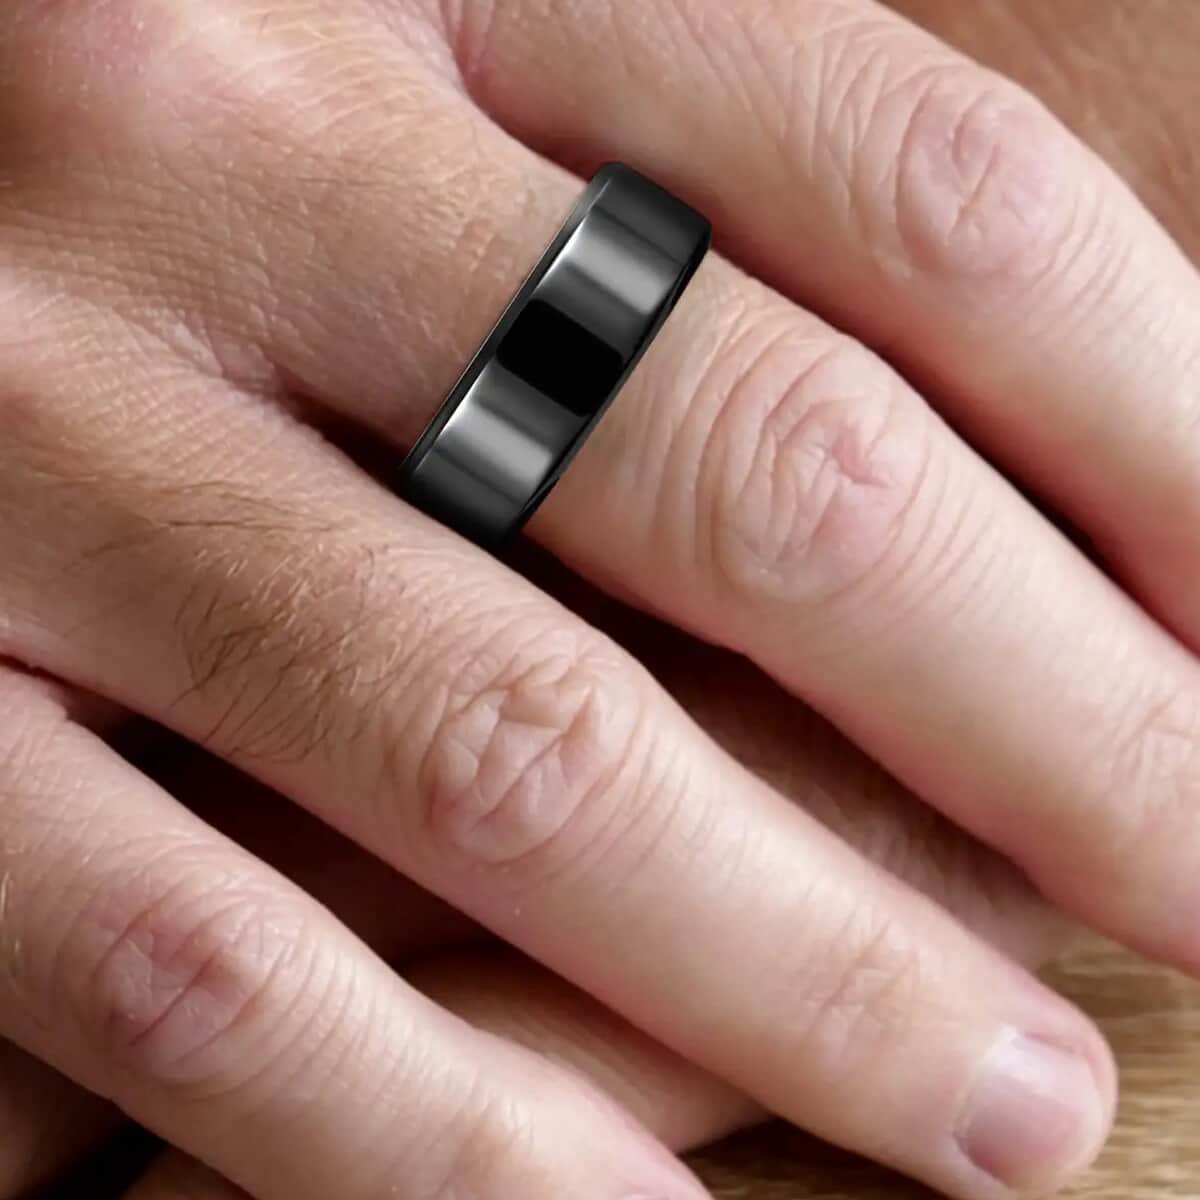 Soulsmart Multifunctional Health Tracker Smart Ring (Size 11.0) in ION Plated Black Stainless Steel (Compatible with Android 5.0+ & Apple IOS 10.0+ Systems) (Del. in 10-15 Days) image number 8